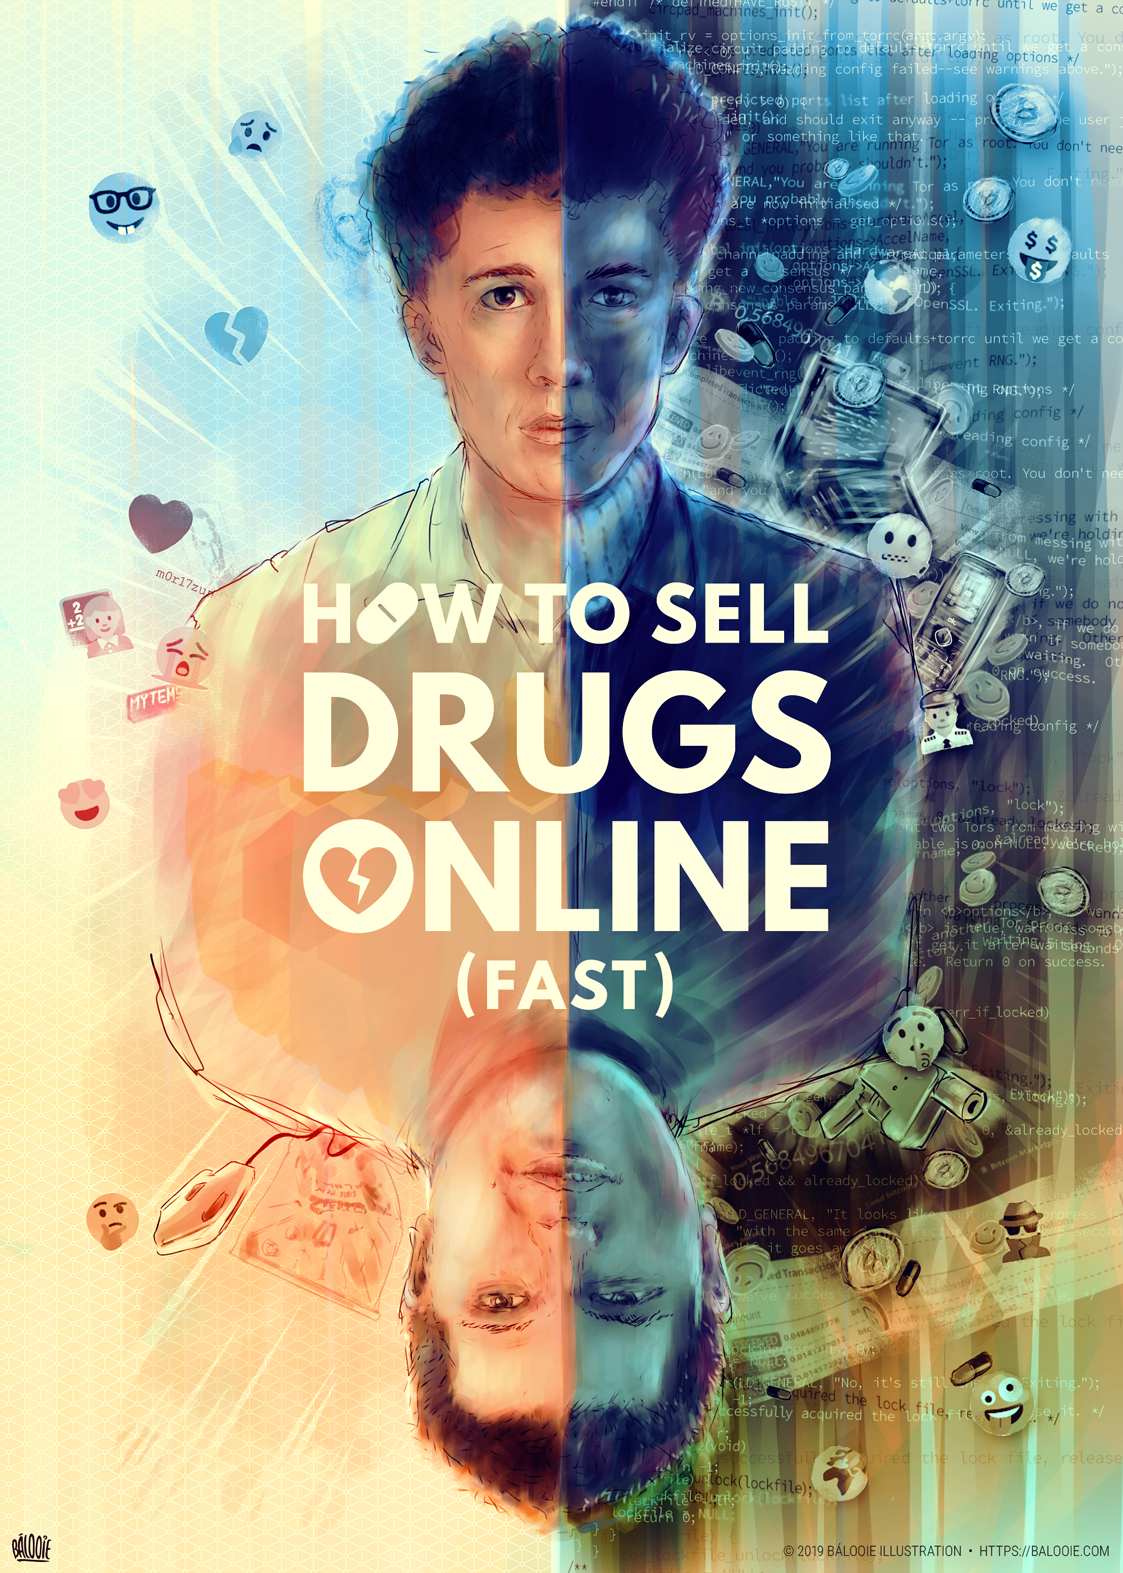 How To Sell Drugs Online (Fast) – Netflix series cover illustration draft 2